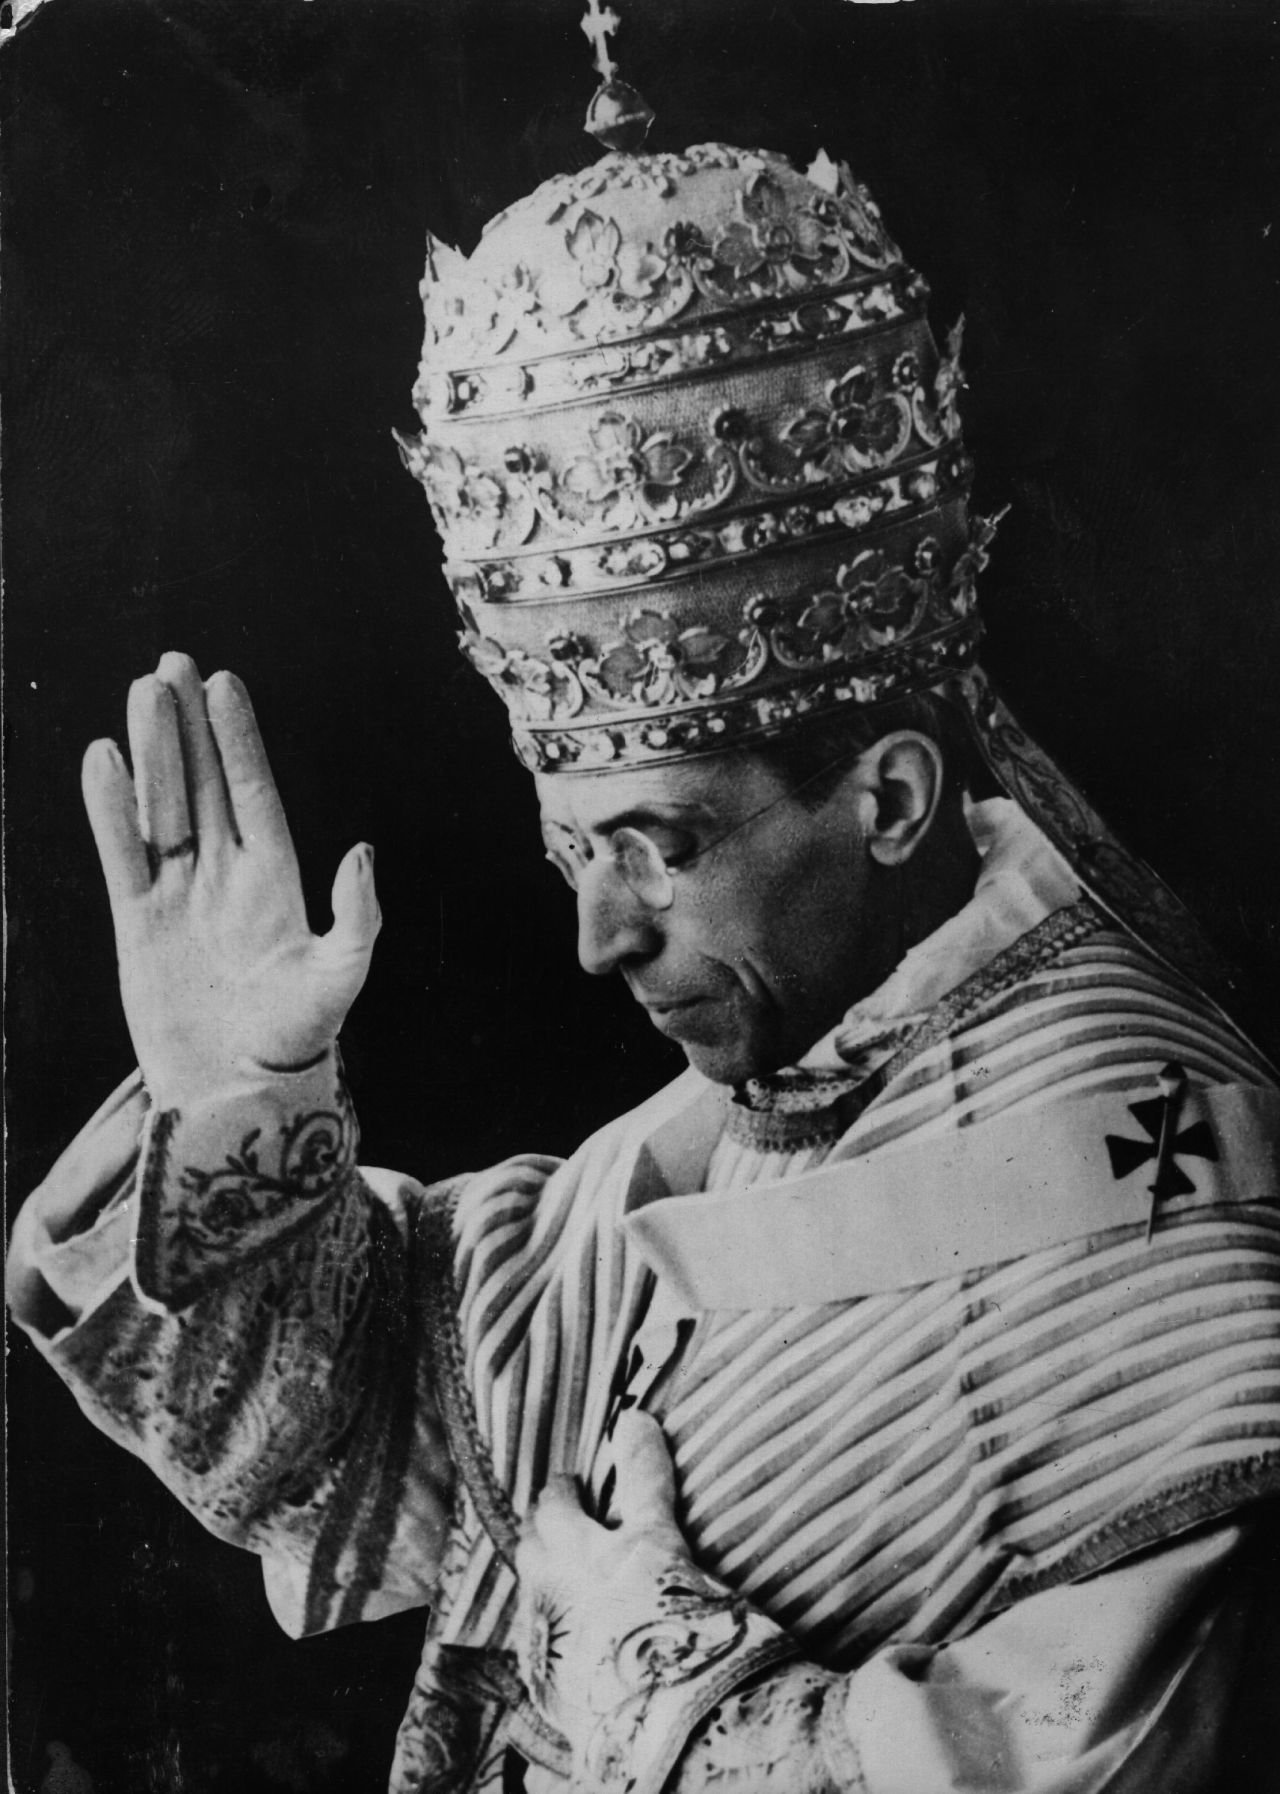 Pictured here in December 1939, Pope Pius XII, wearing the triregnum, bestows a blessing during a visit to the king and queen of Italy. The triregnum is the three-tiered papal tiara, or triple crown, that was placed on the head of the pope during the "coronation" part of the inaugural mass, Beck said. "It was last worn by Pope Paul VI, who seemed to think better of it because during the Second Vatican Council, he dramatically put it on the altar at St. Peter's Basilica and said to sell it and give the money to the poor," Beck said.  No pope has had a coronation or worn the triregnum since.